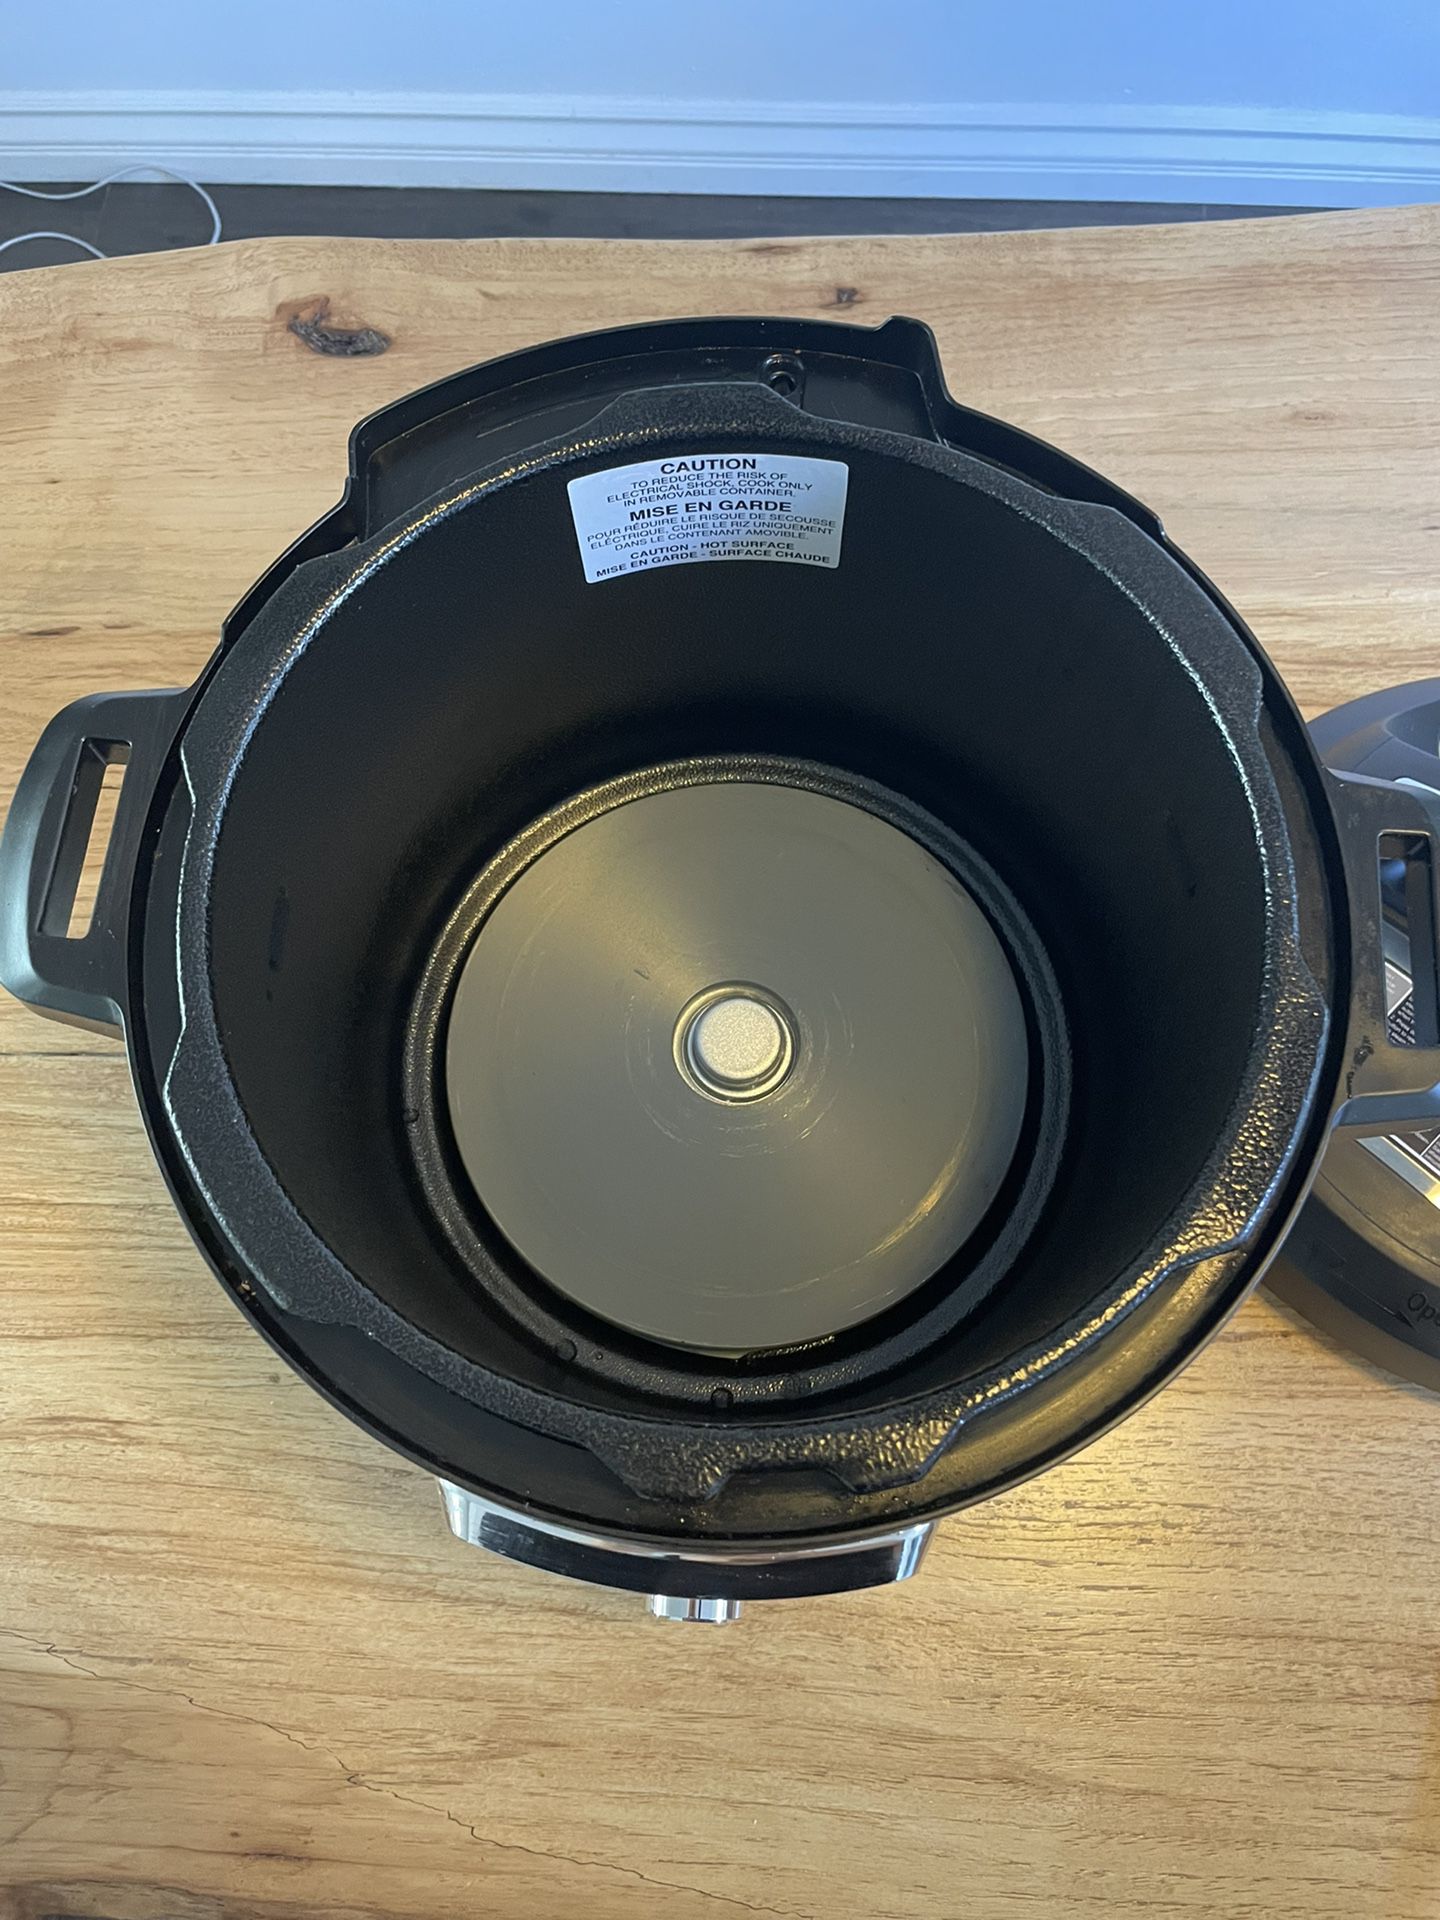 Instant Pot 10 Quart for Sale in Federal Way, WA - OfferUp